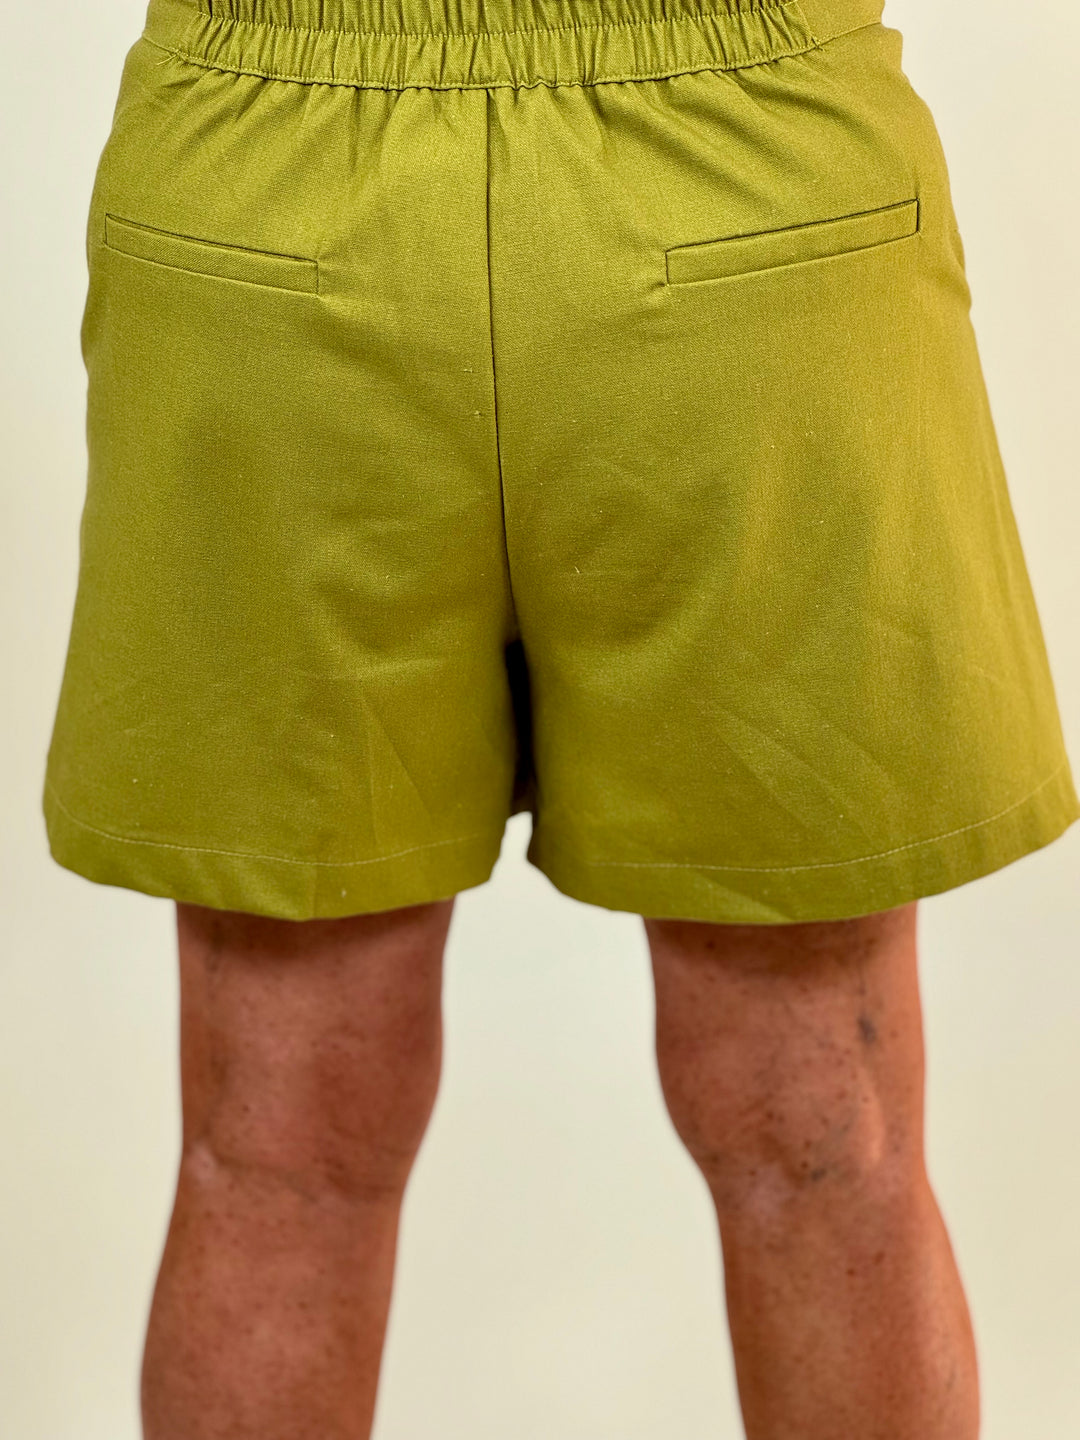 RESTOCKED: Breezy Palms Linen Shorts - 5 Color Options - Available Medium Through Extended Sizes - Final Sale